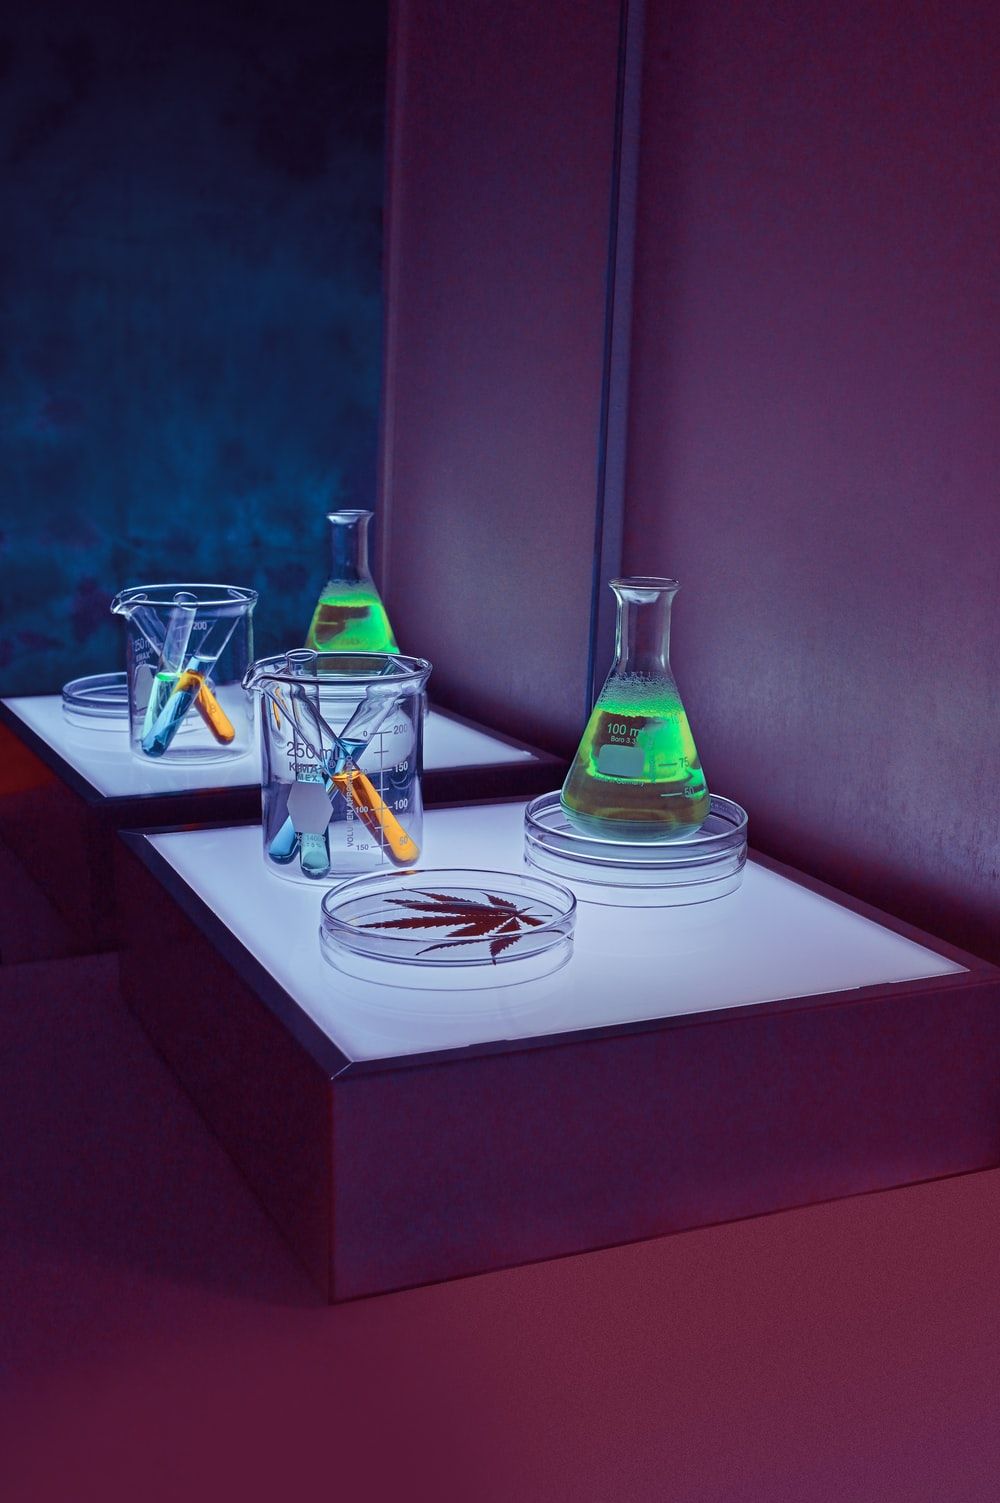 Science Lab Picture. Download Free Image